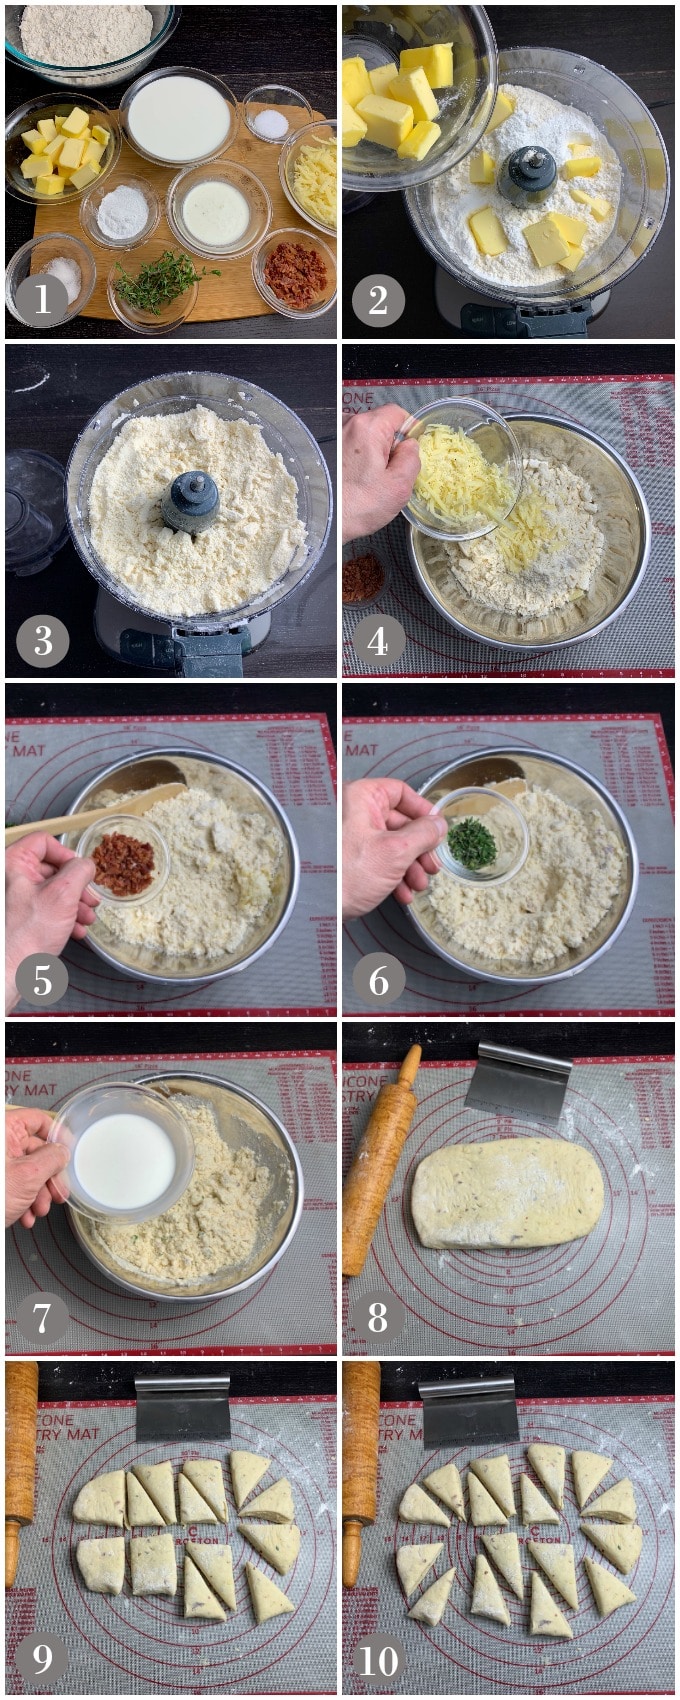 A collage of photos showing ingredients and steps to make bacon candied walnut scones 1-10.